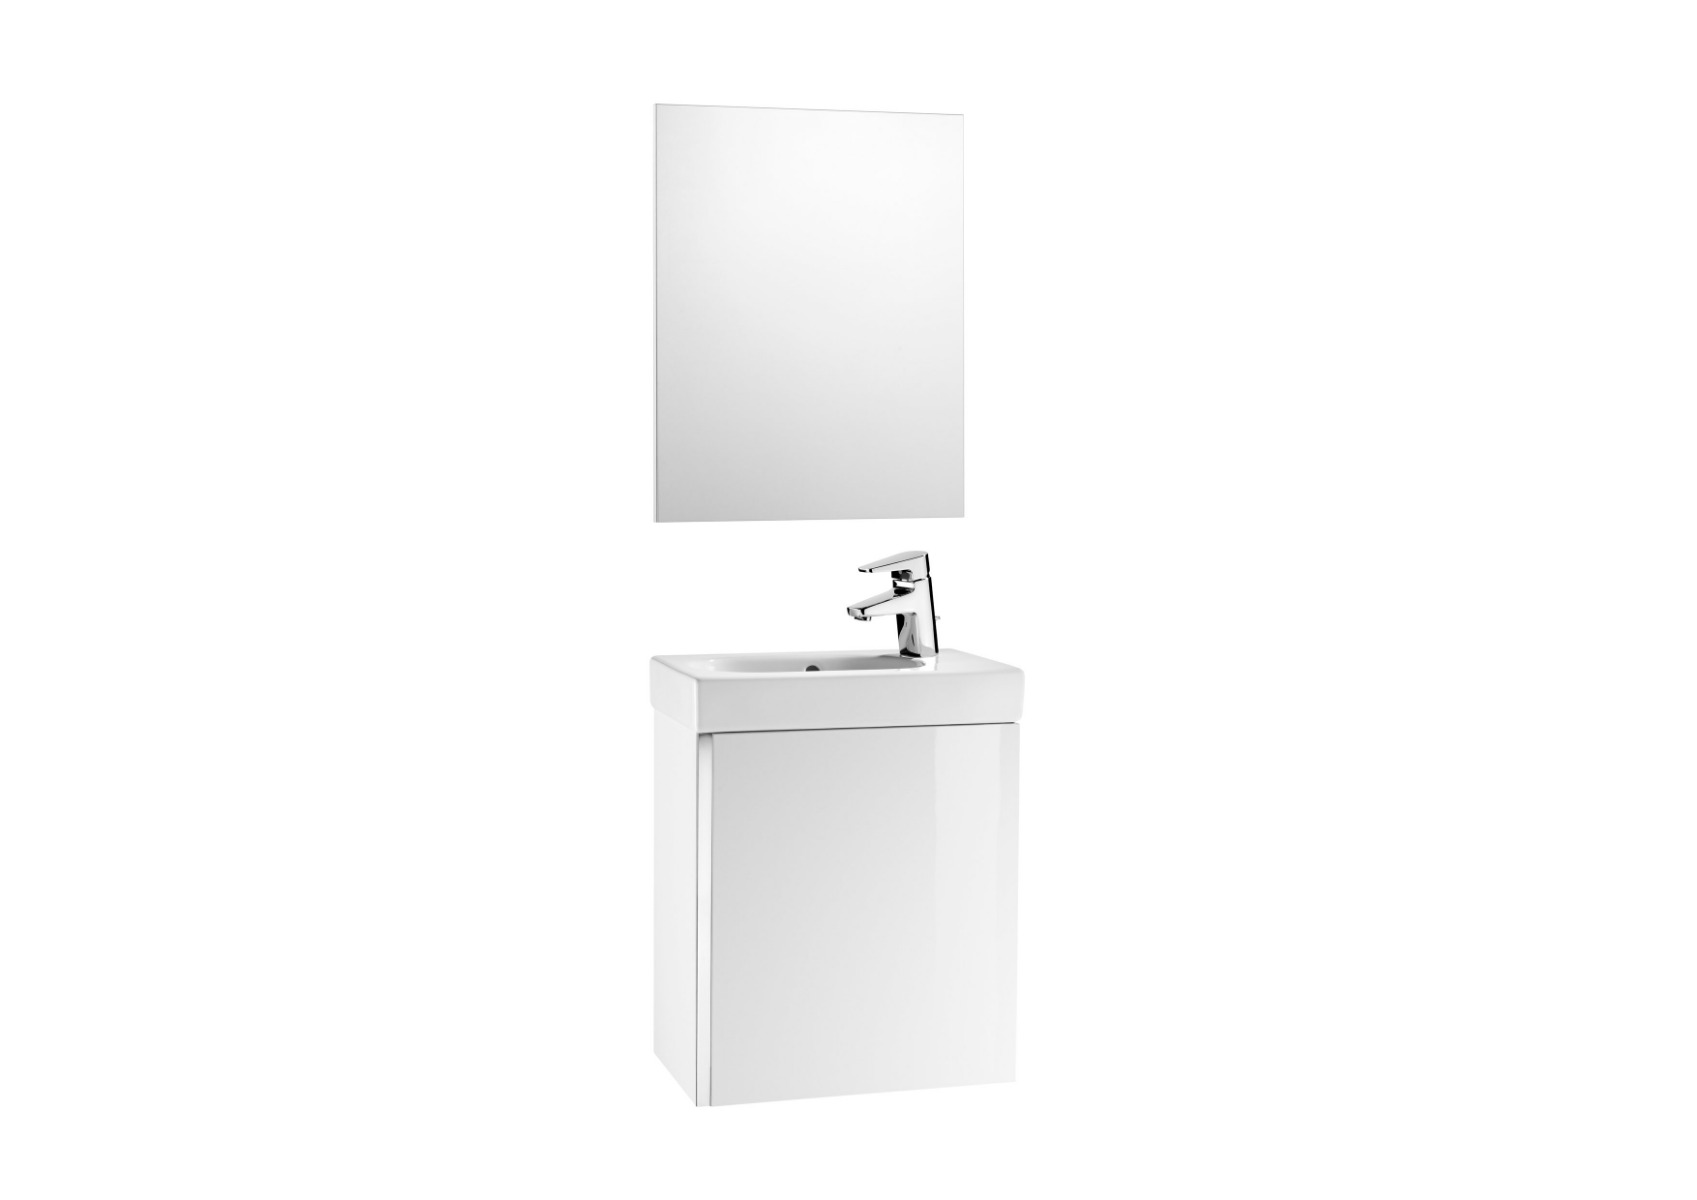 Pack with mirror (base unit, basin and mirror) 450 x 250 x 575 mm